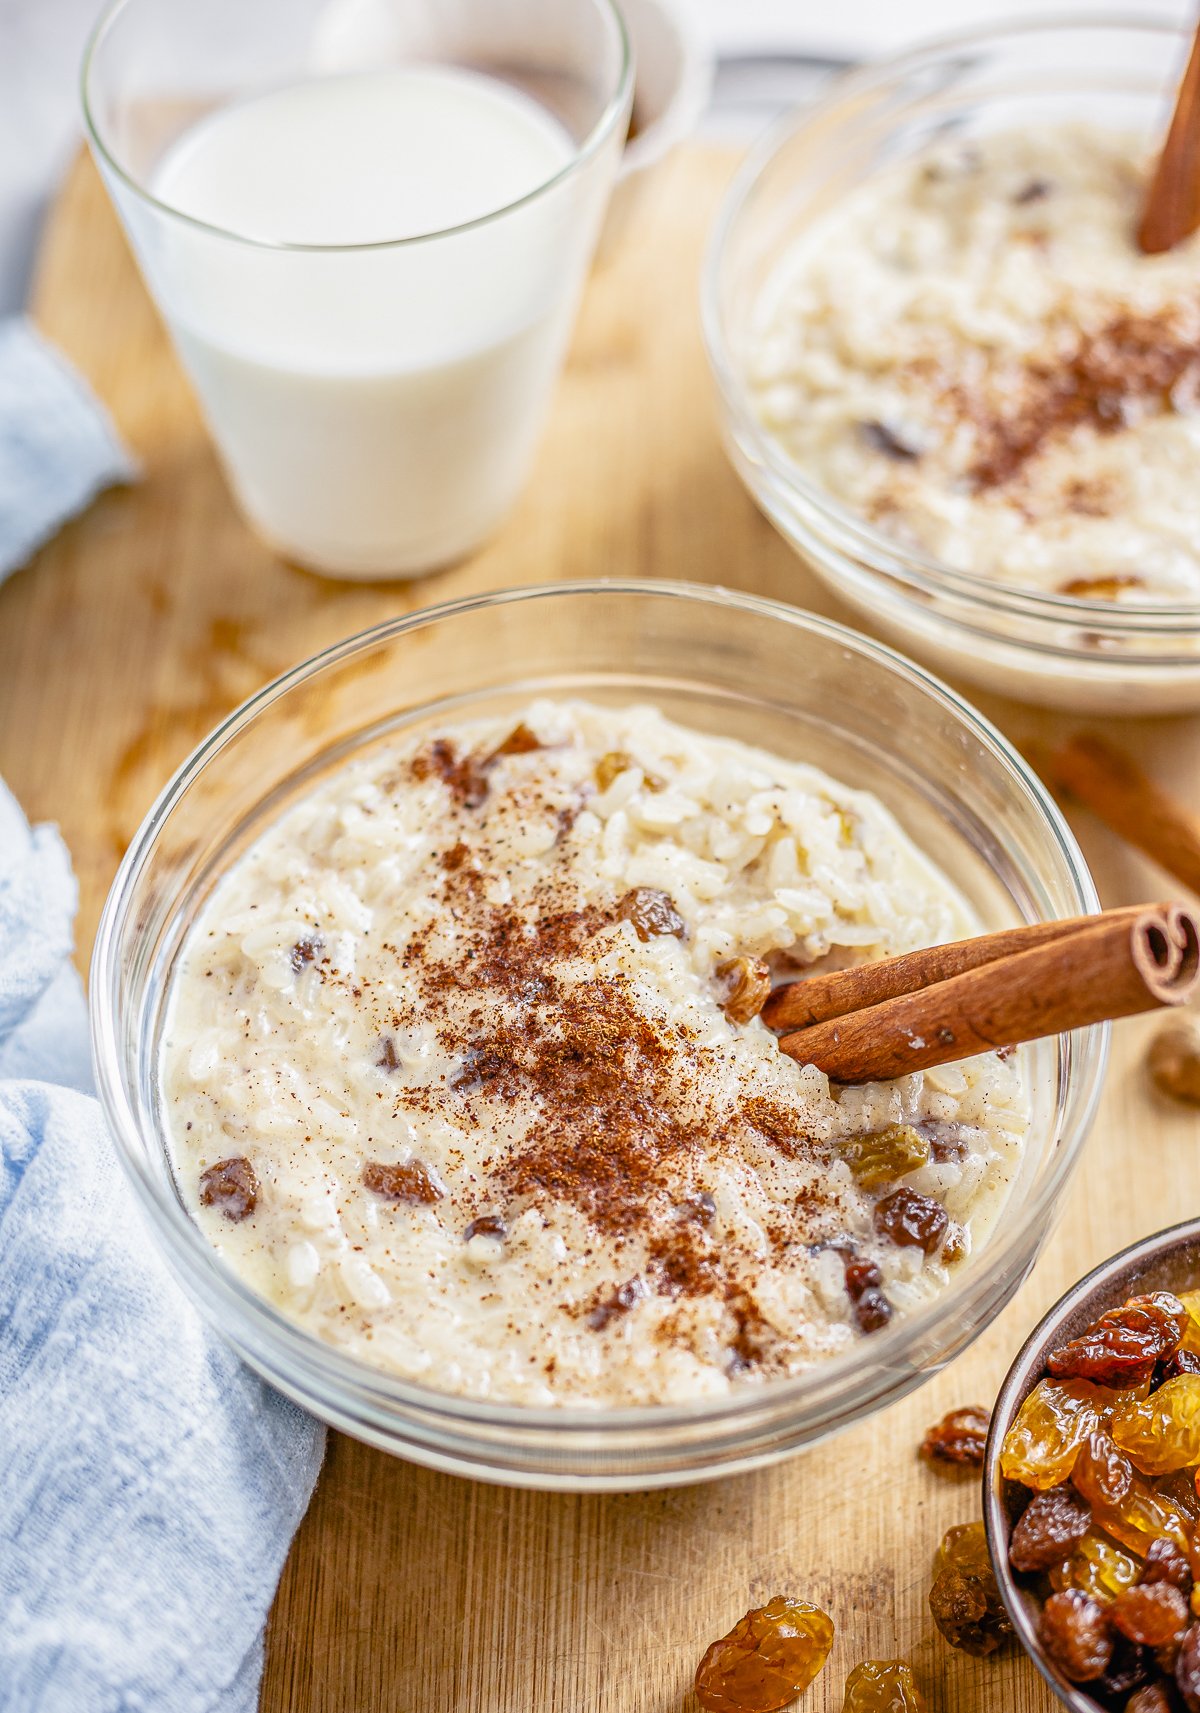 Bowl of Rice Pudding Recipe with cinnamon and golden raisins on side.